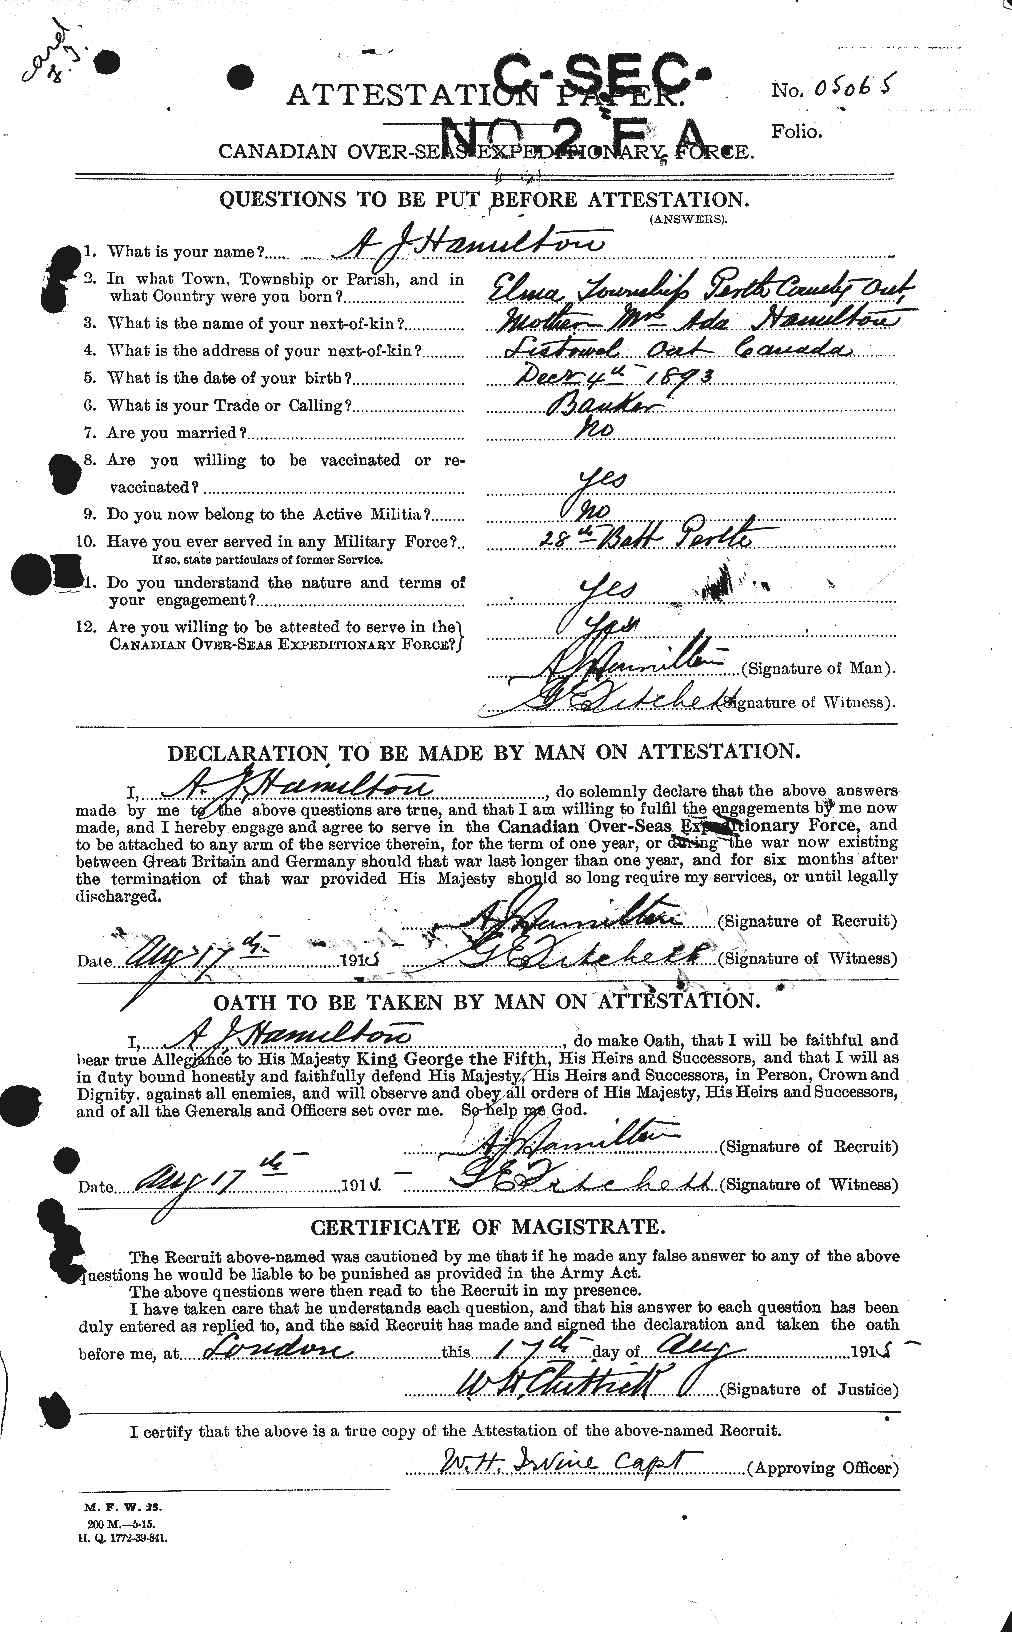 Personnel Records of the First World War - CEF 375177a